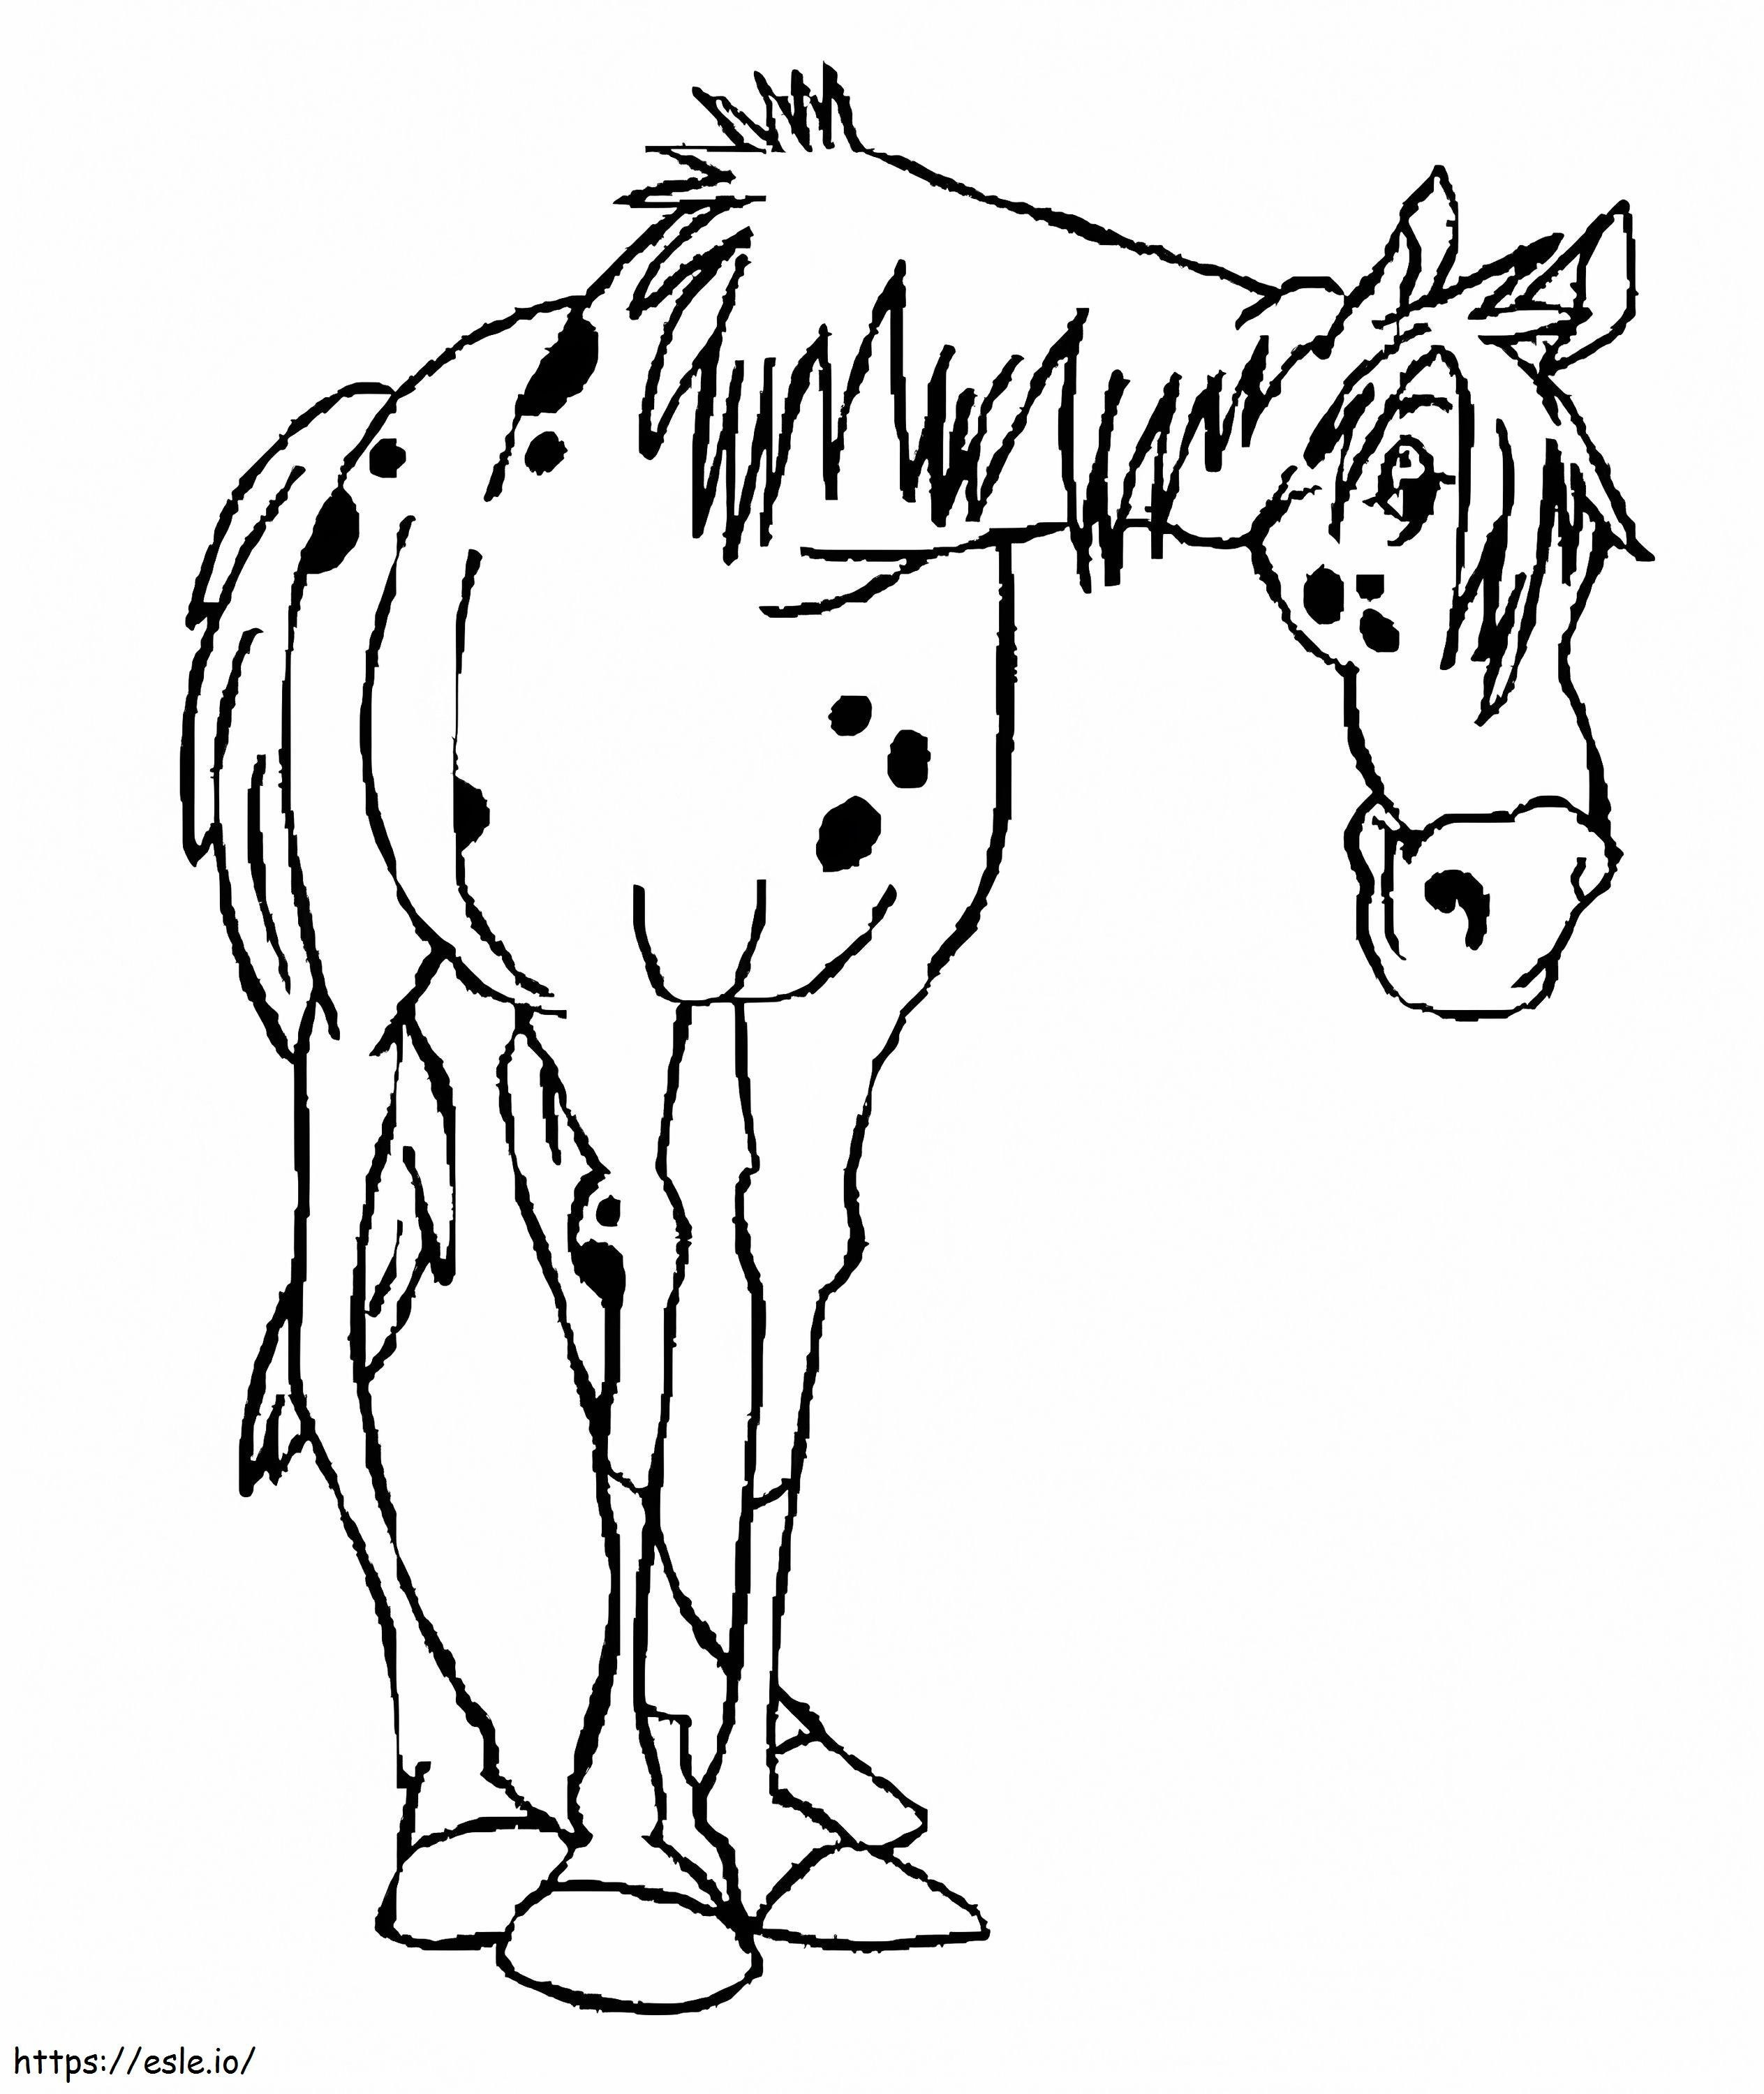 Pippi Longstockings Horse coloring page